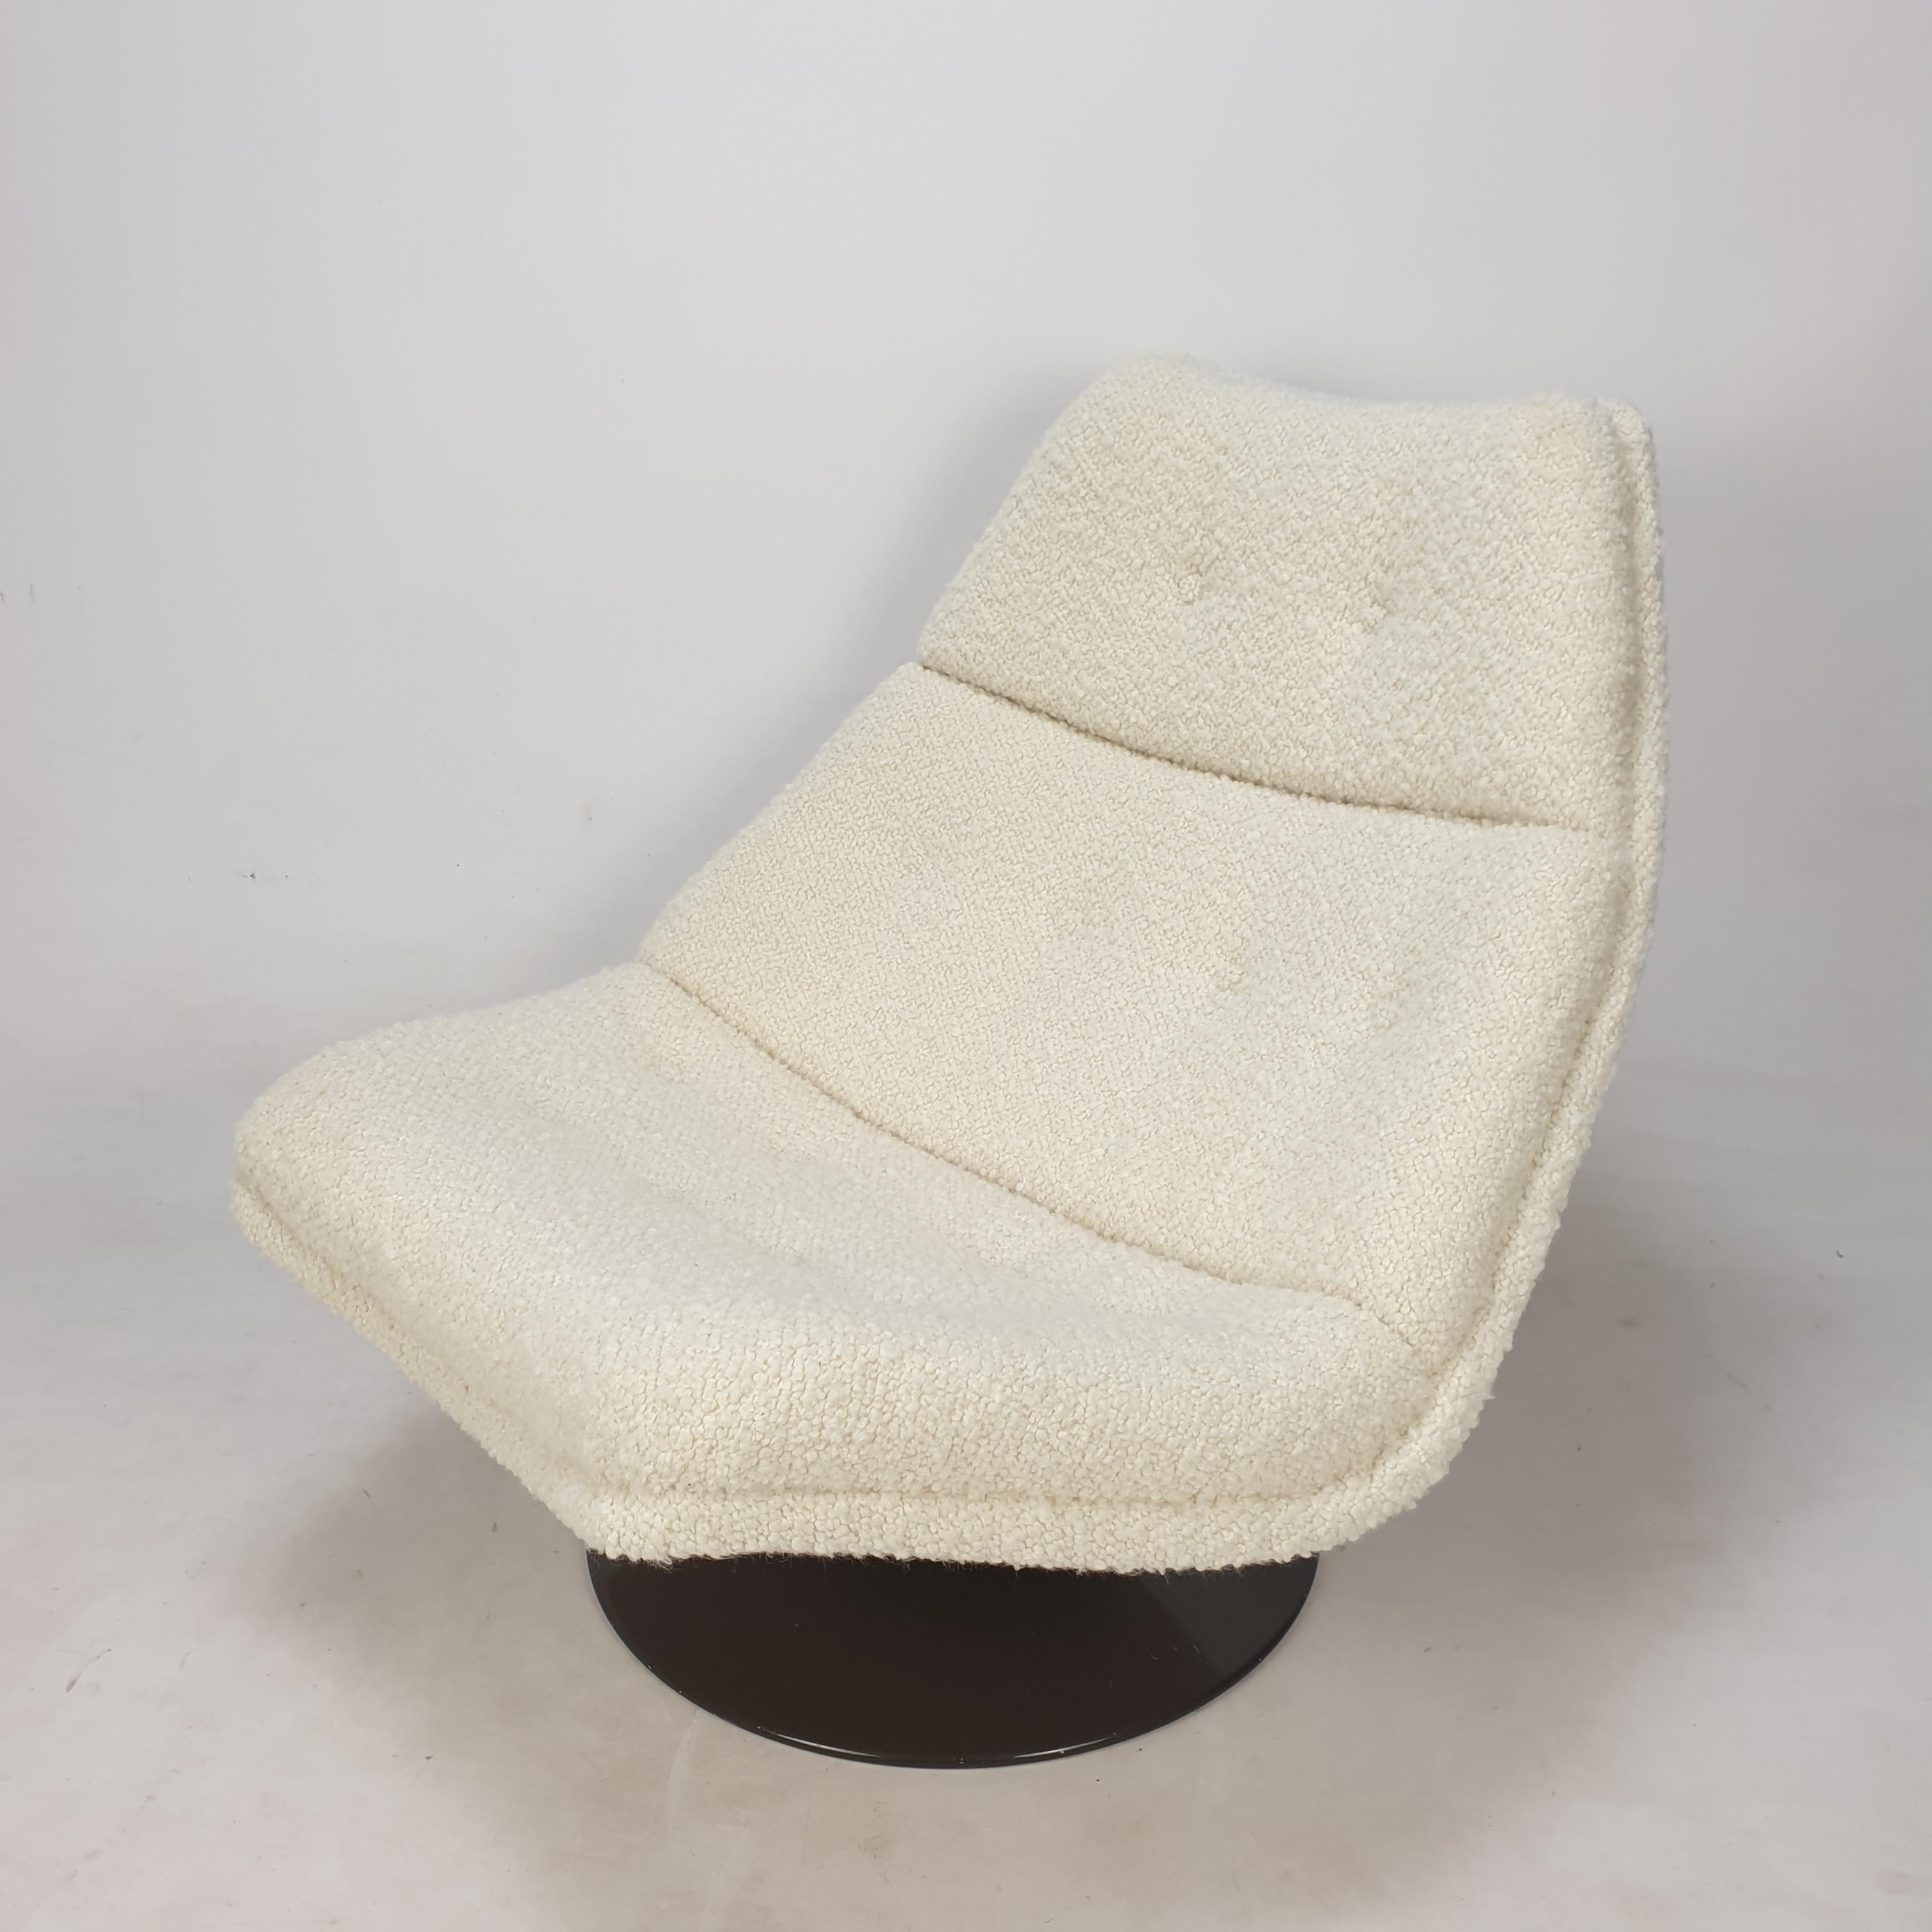 Very comfortable Artifort lounge chair, model F511.
Designed by the famous English designer Geoffrey Harcourt in the 60's. 

The chair is just restored with new fabric and new foam.
It is reupholstered with very soft Italian bouclé fabric.
It